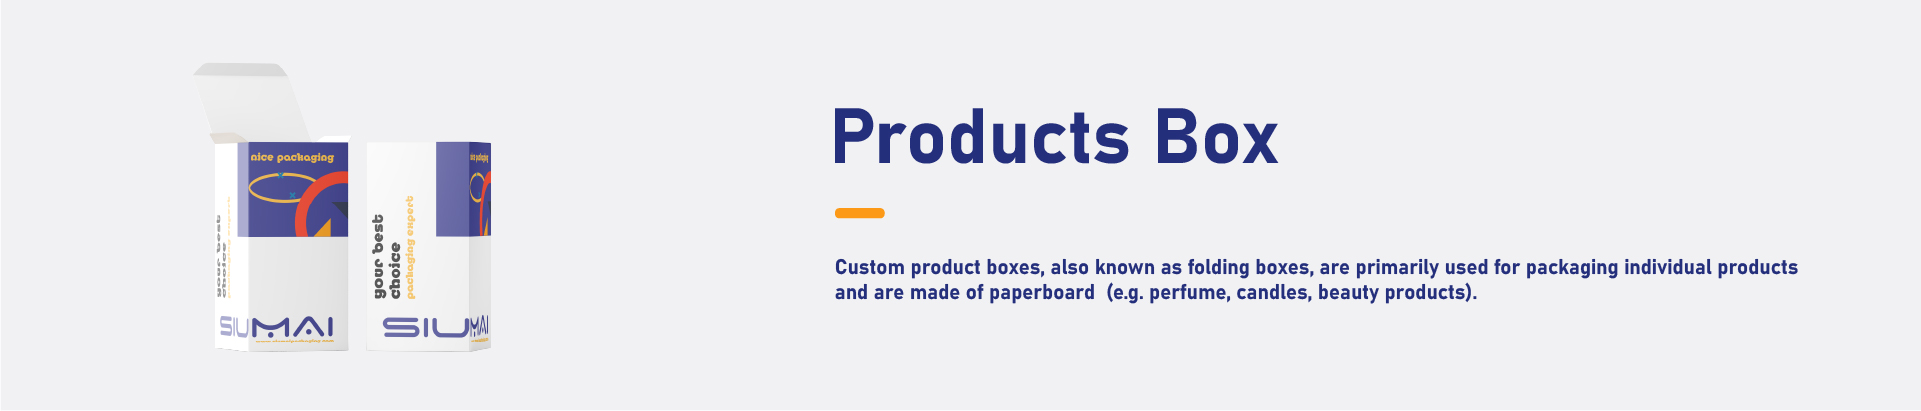 productbox2